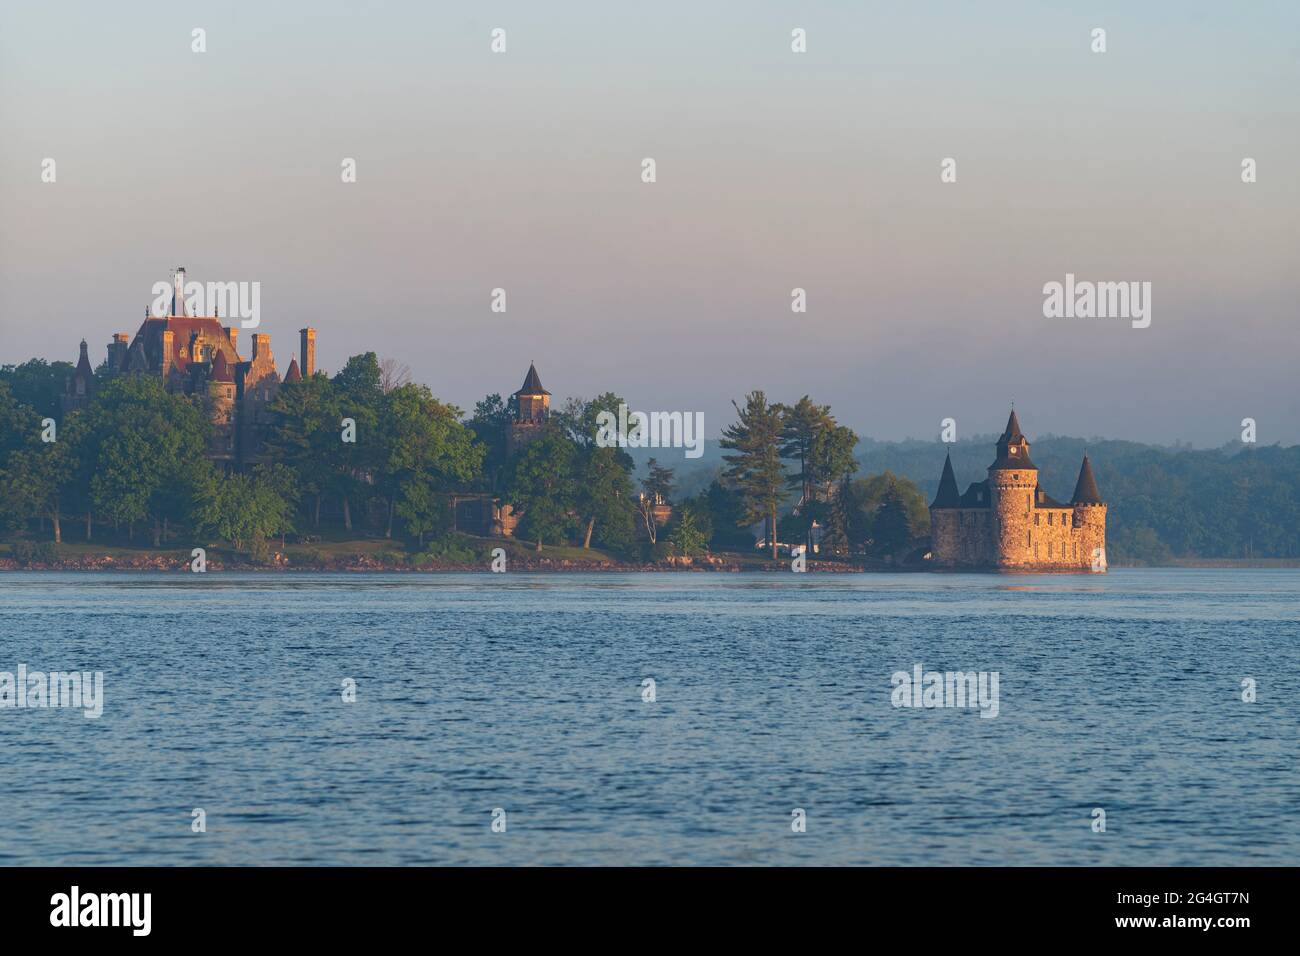 Boldt Castle, a major landmark and tourist attraction, is located in the Thousand Islands region of New York on Heart Island in the Saint Lawrence Riv Stock Photo